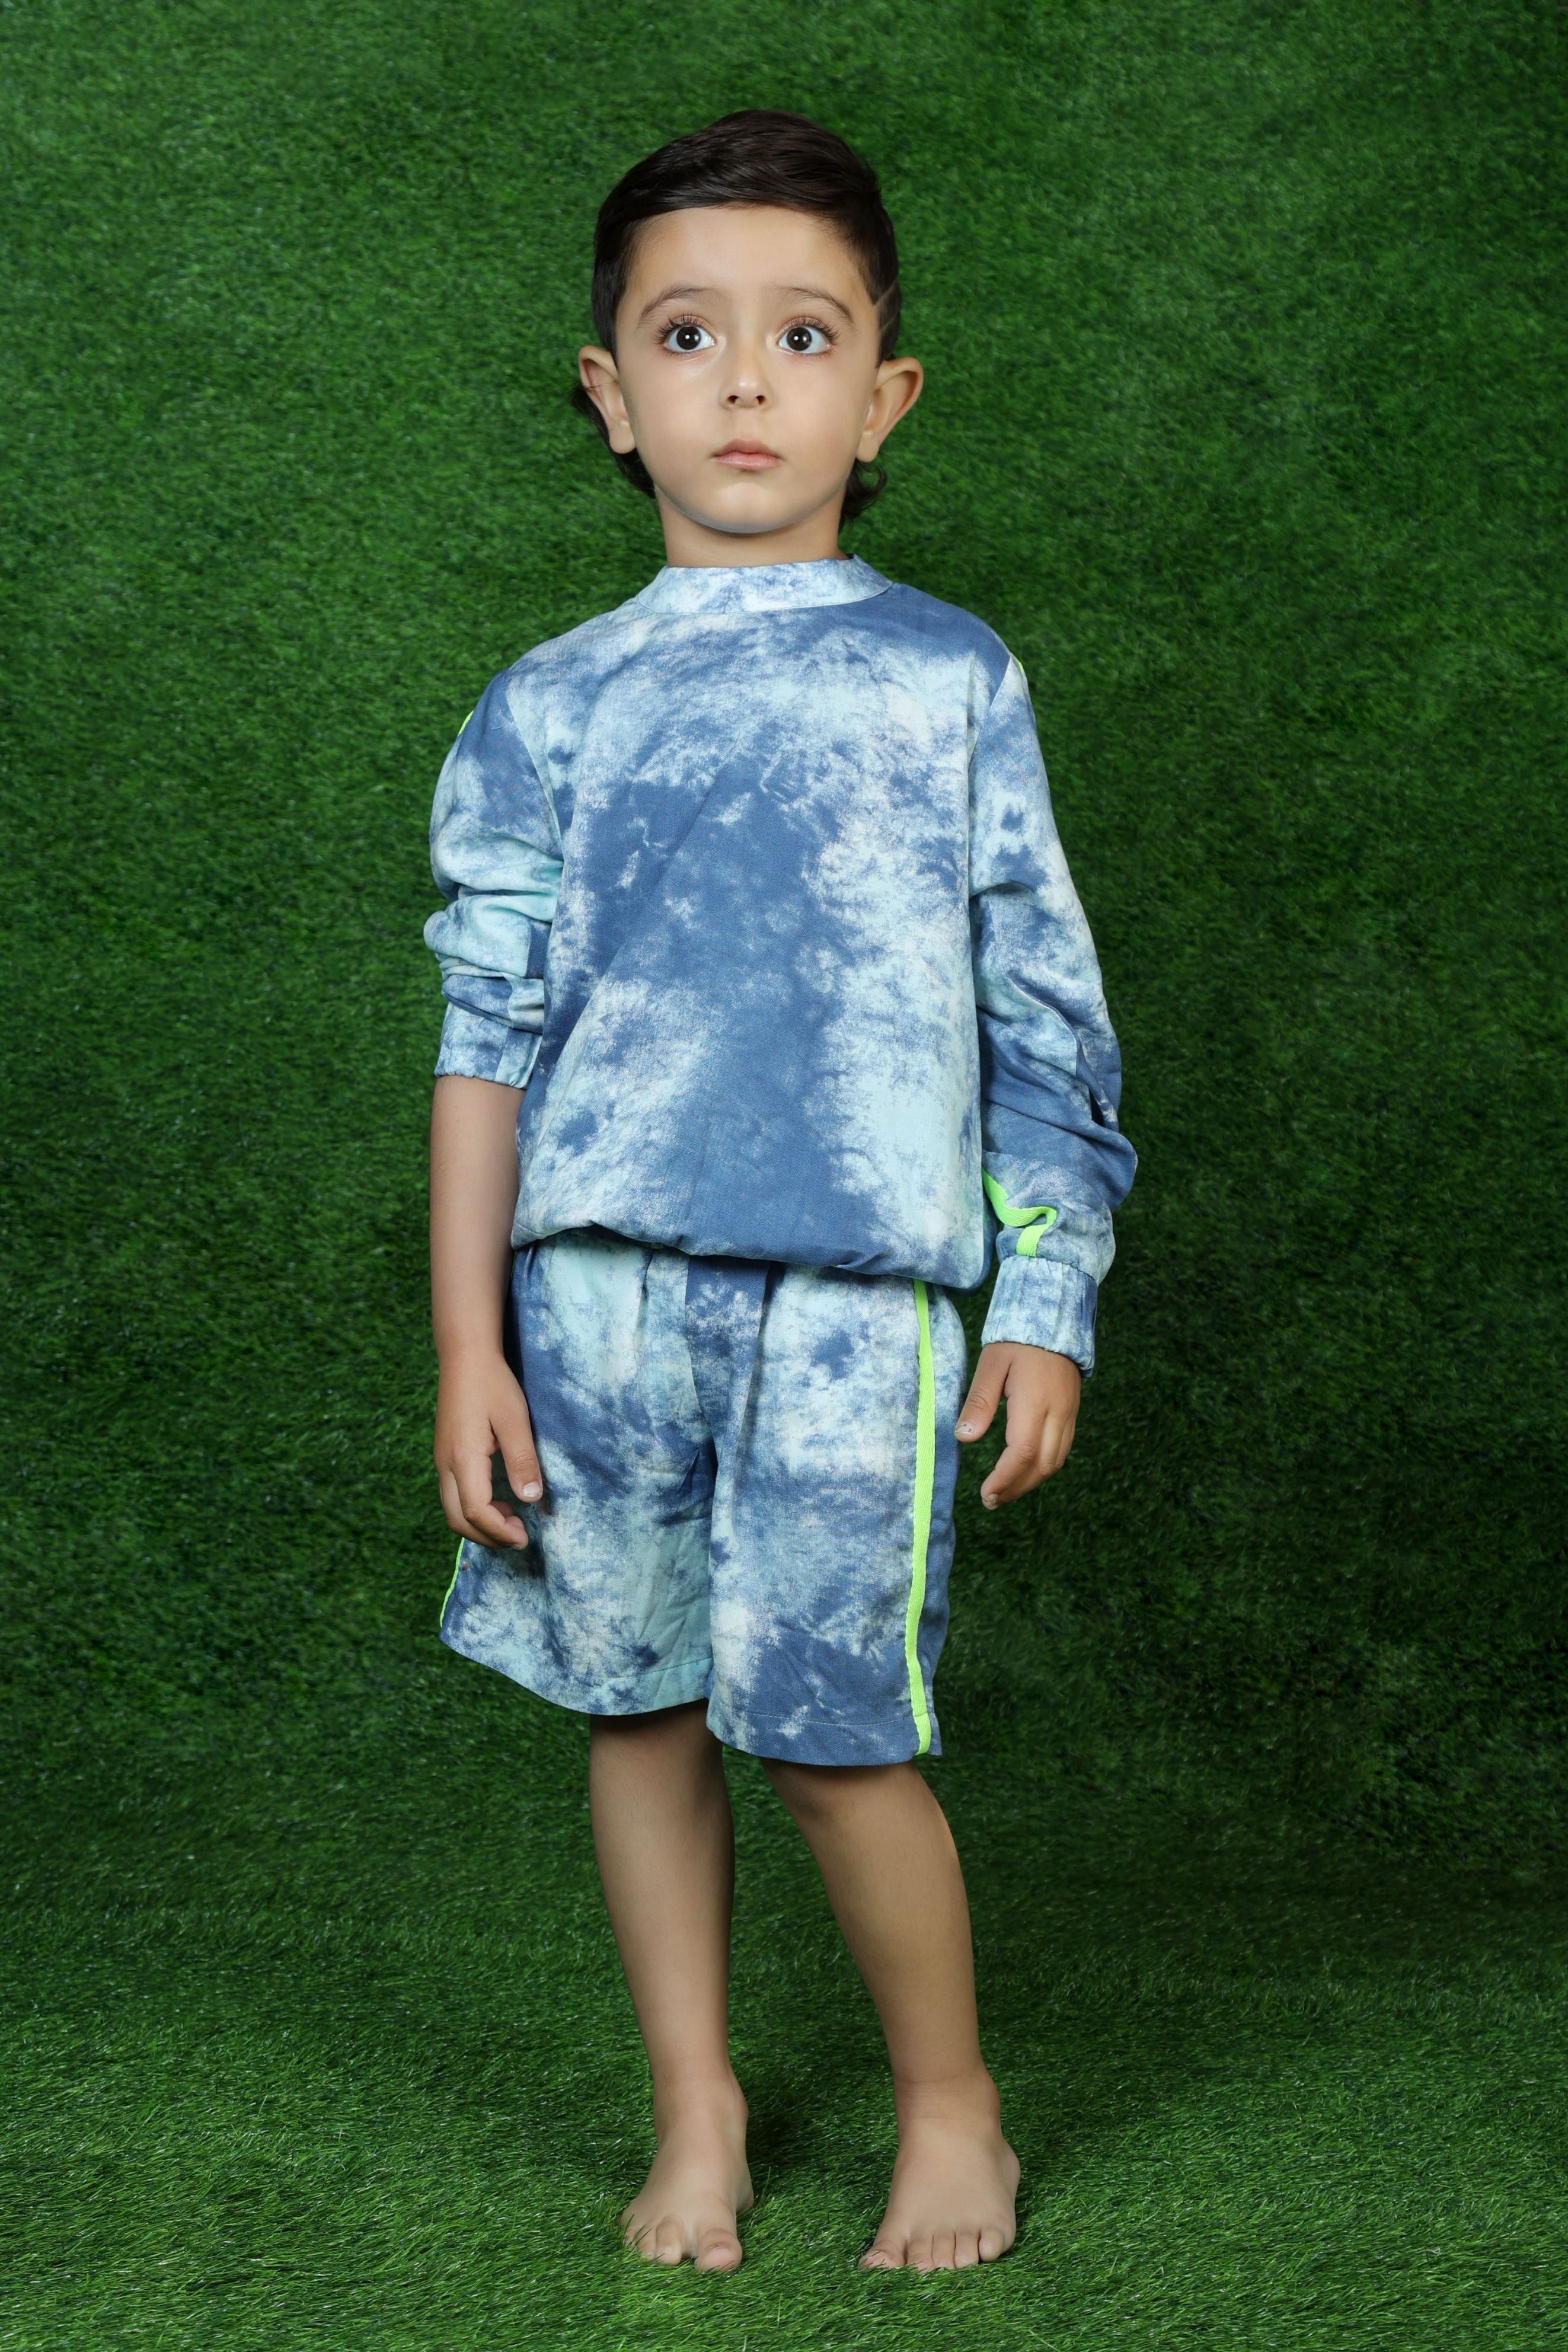 OCEAN BOYS SET - SET OF TWO (TOP + SHORTS) - The Pony & Peony Co.